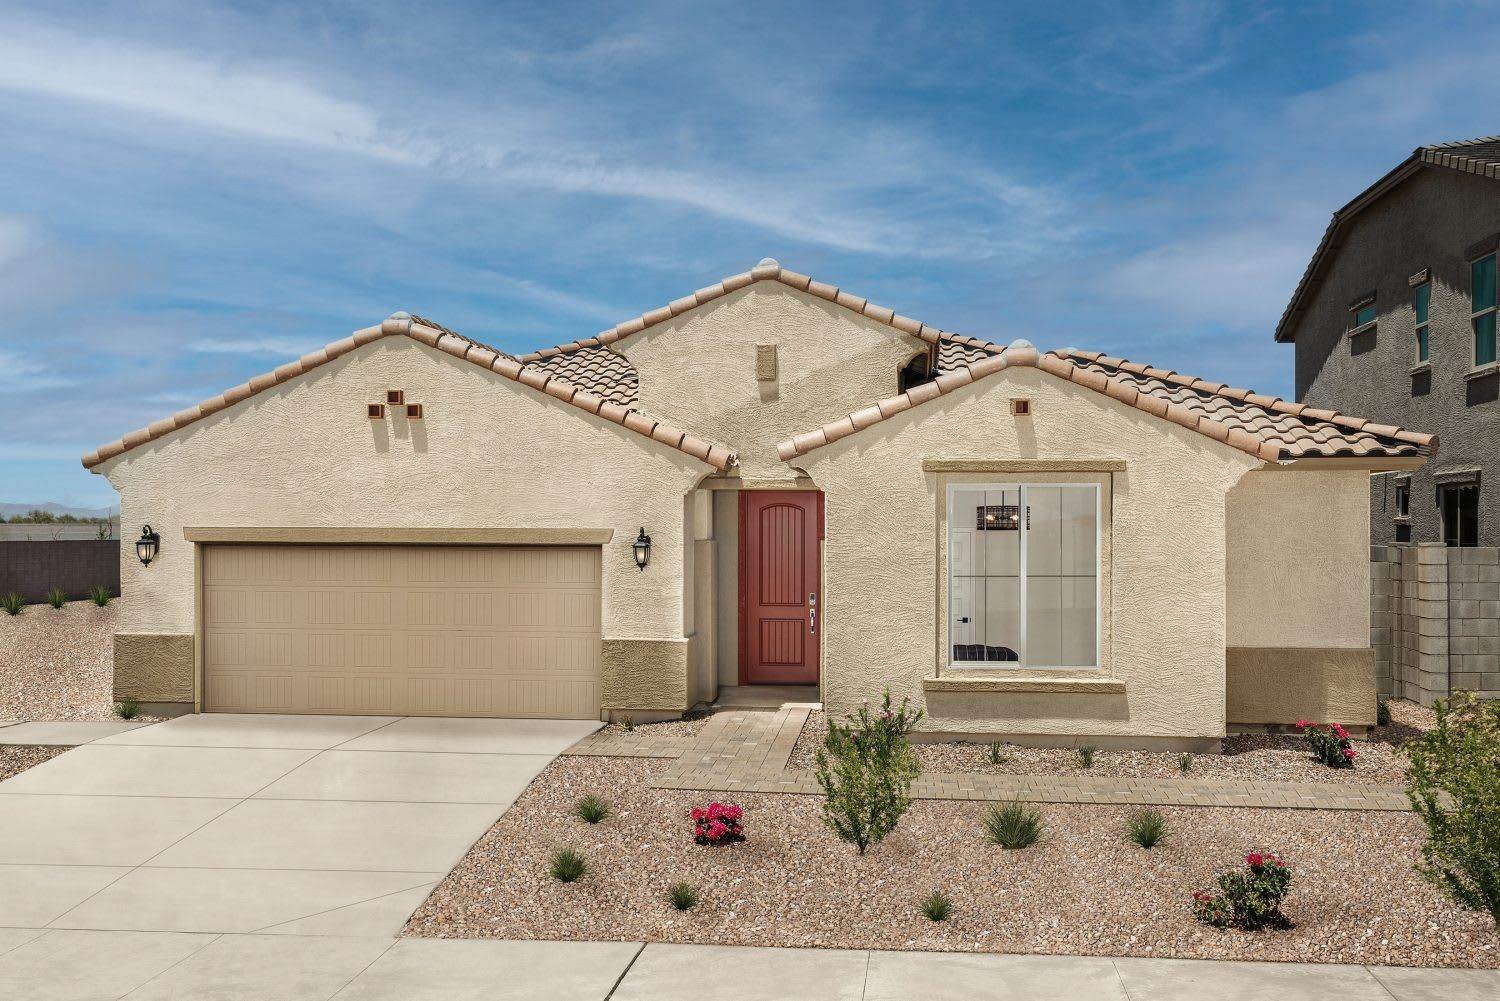 The Villages at North Copper Canyon - Peak Series building at 22985 N 183rd Drive, Surprise, AZ 85387